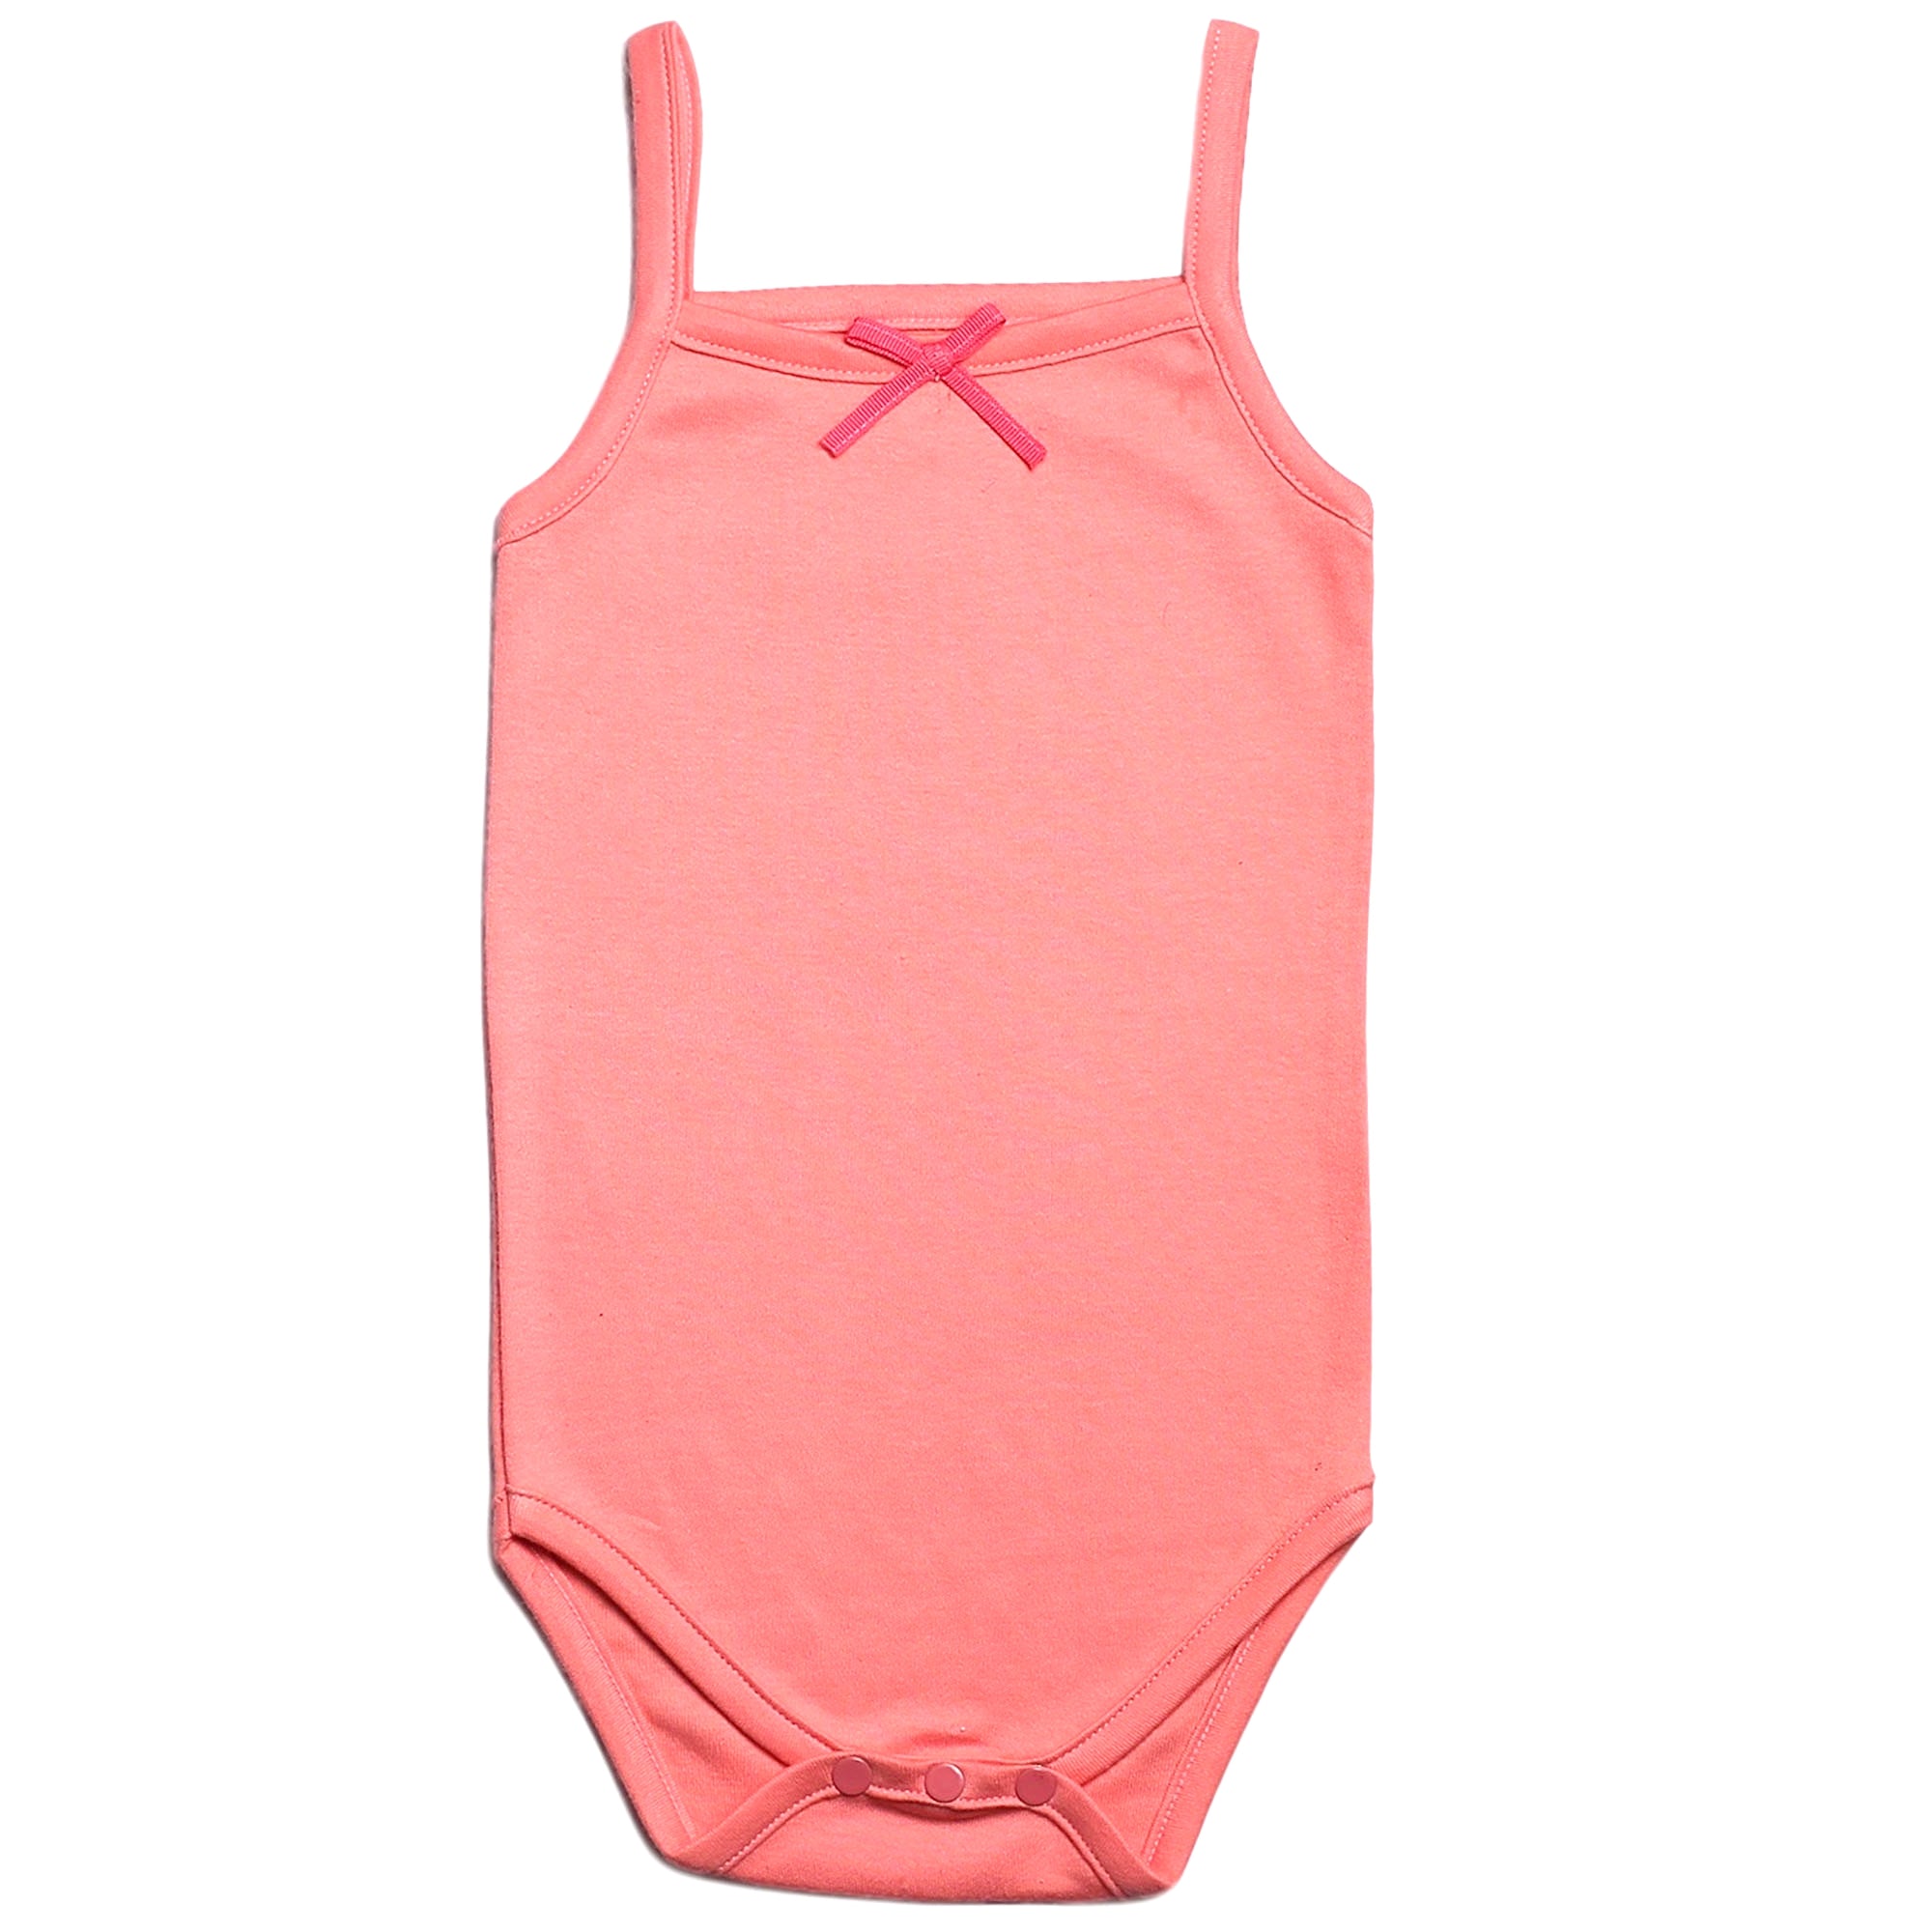 FS-68 Pink Paws 2-Pack Tank Top Bodysuits - Featherhead Baby